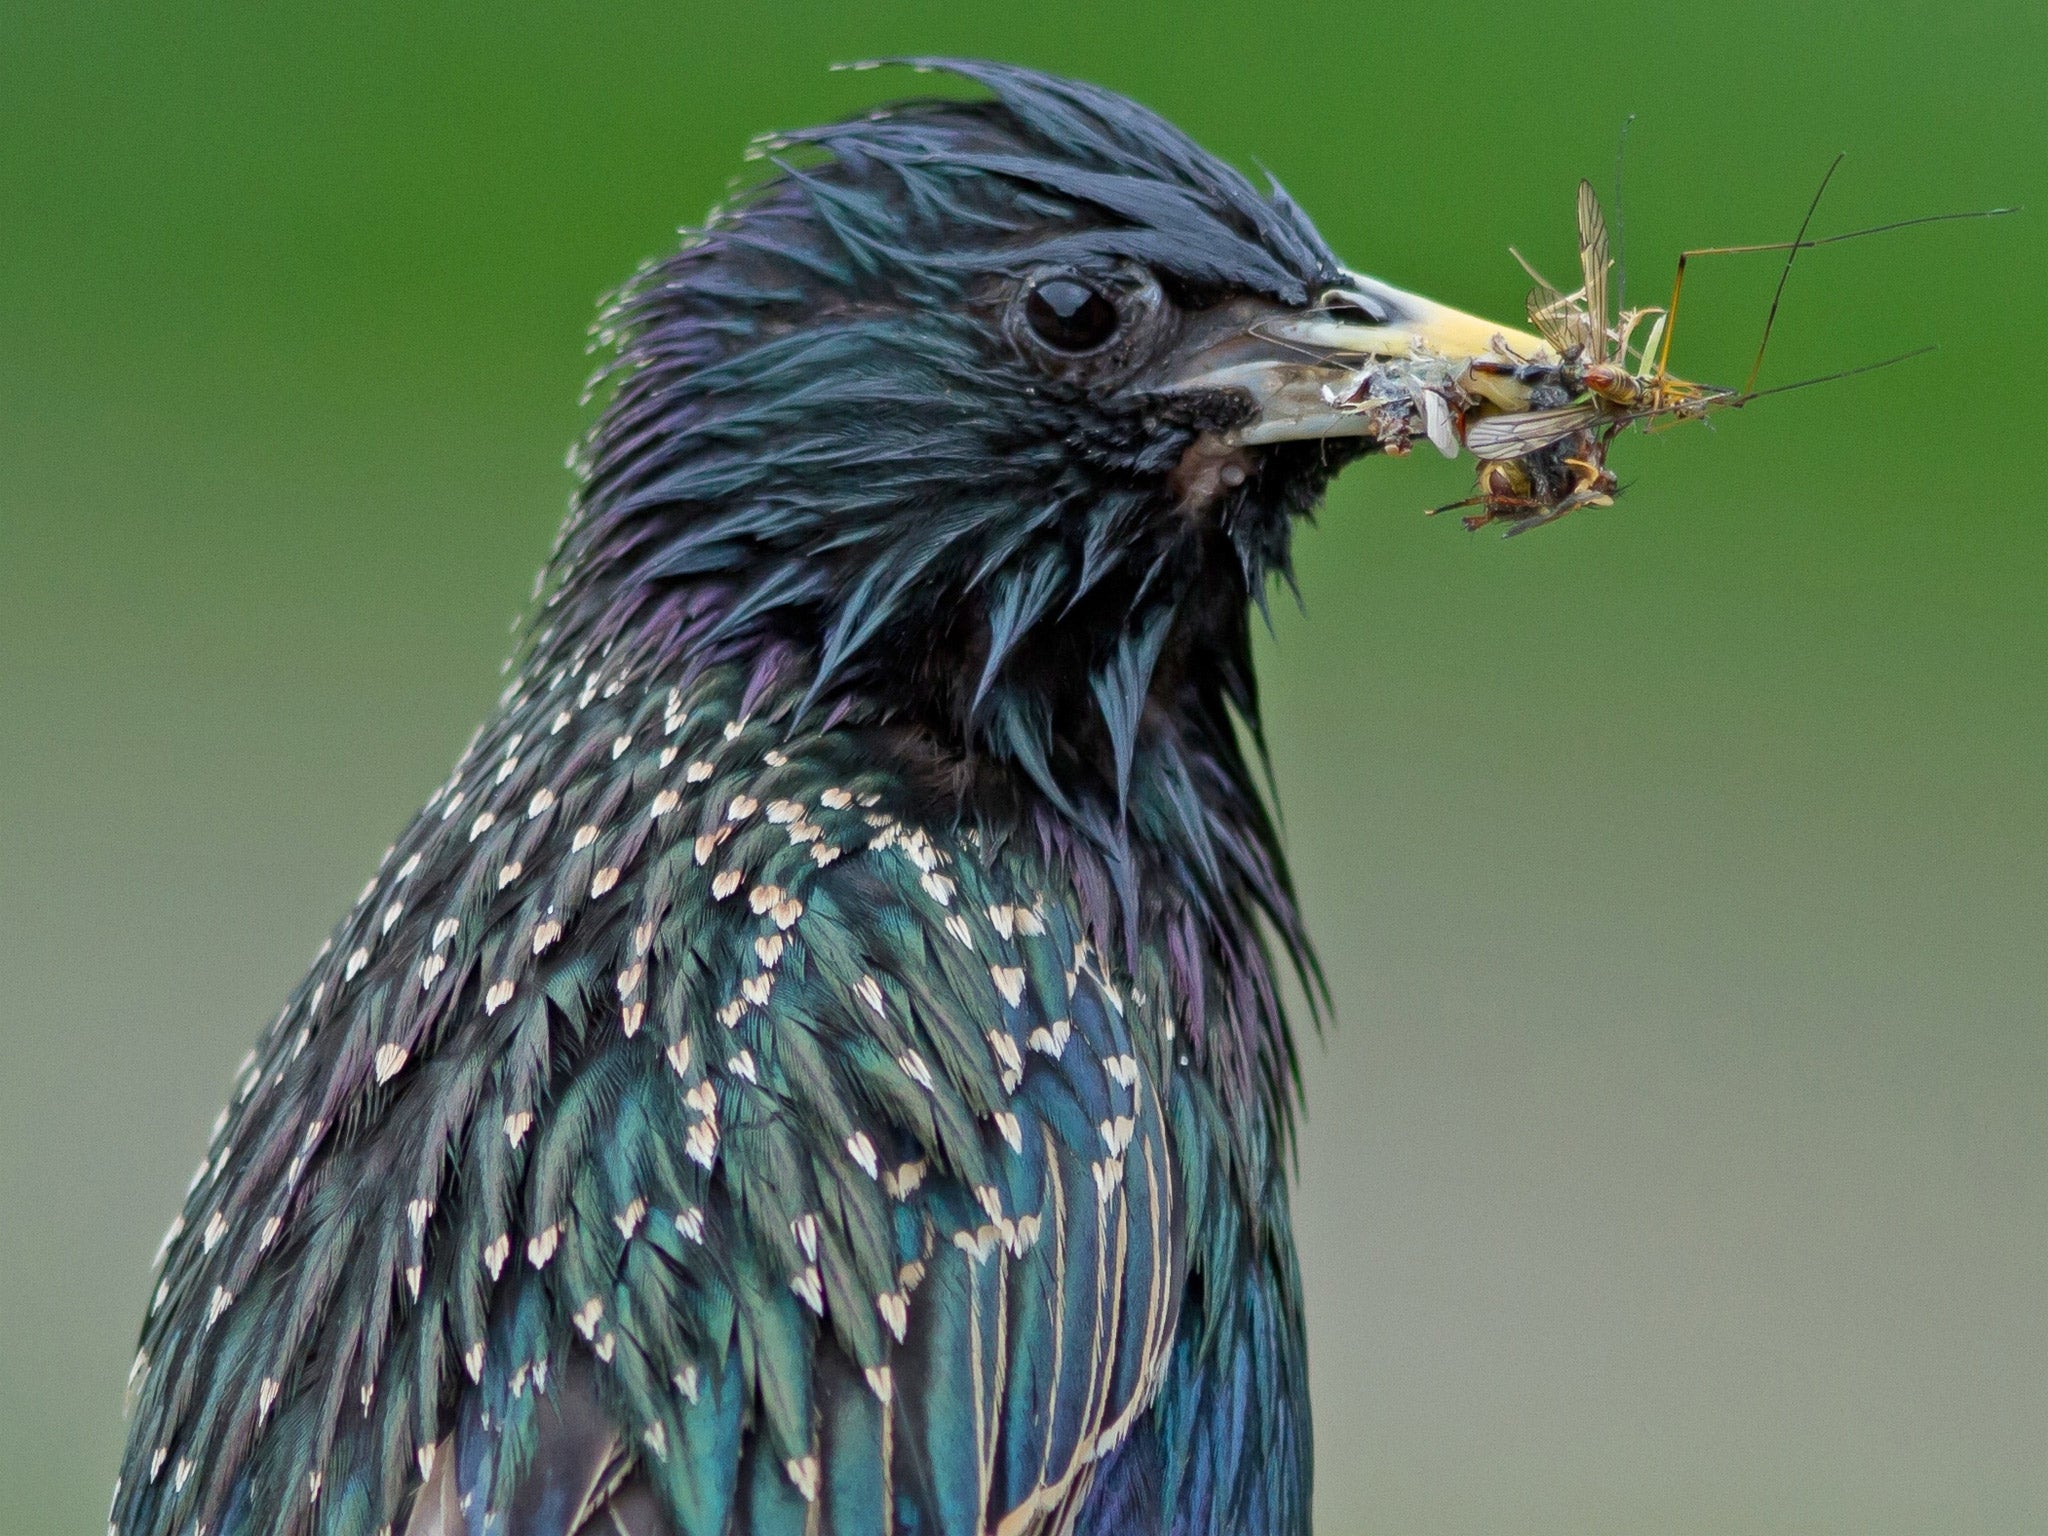 The starling is one of 15 bird species whose decline in population has been linked to pesticide use in the Netherlands